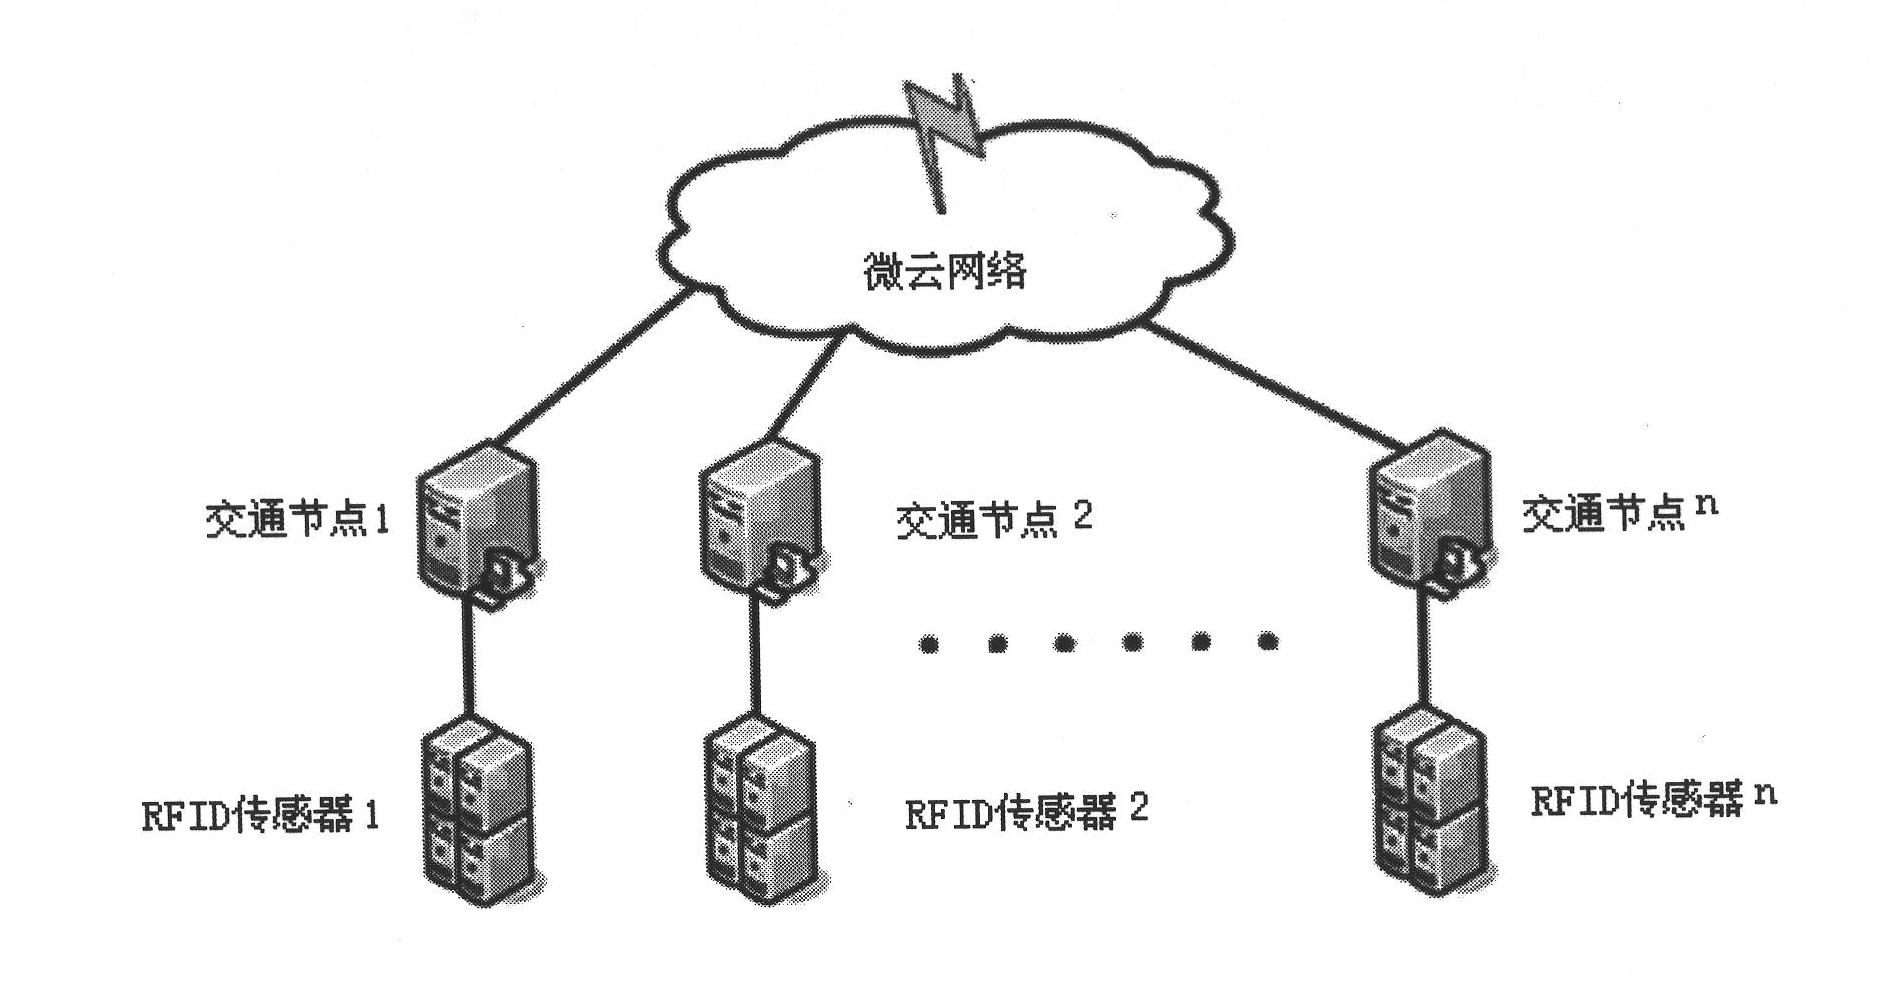 Intelligent traffic self-networking system with cloudlet function